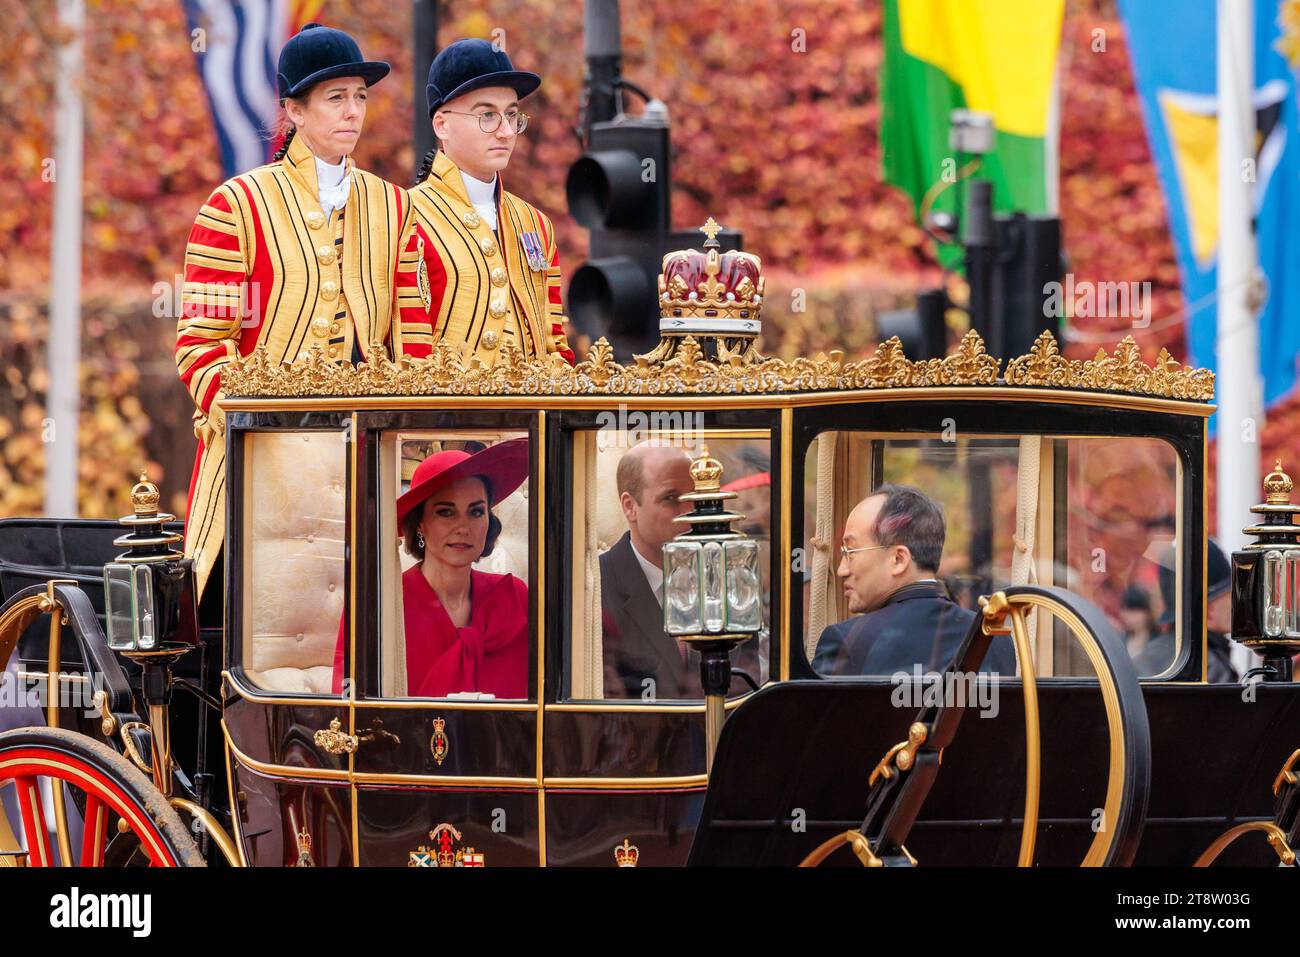 The Mall, London, UK. 21st November 2023. Their Royal Highnesses, The Prince and Princess of Wales, along with South Korean Deputy Prime Minister, Choo Kyung-ho, ride in a carriage procession along The Mall following a formal welcome of The President of the Republic of Korea, His Excellency Yoon Suk Yeol, and the First Lady, Mrs Kim Keon Hee, by Their Majesty's King Charles III and Queen Camilla on Horse Guards Parade on the first full day of the South Korean State Visit to the UK. Photo by Amanda Rose/Alamy Live News Stock Photo